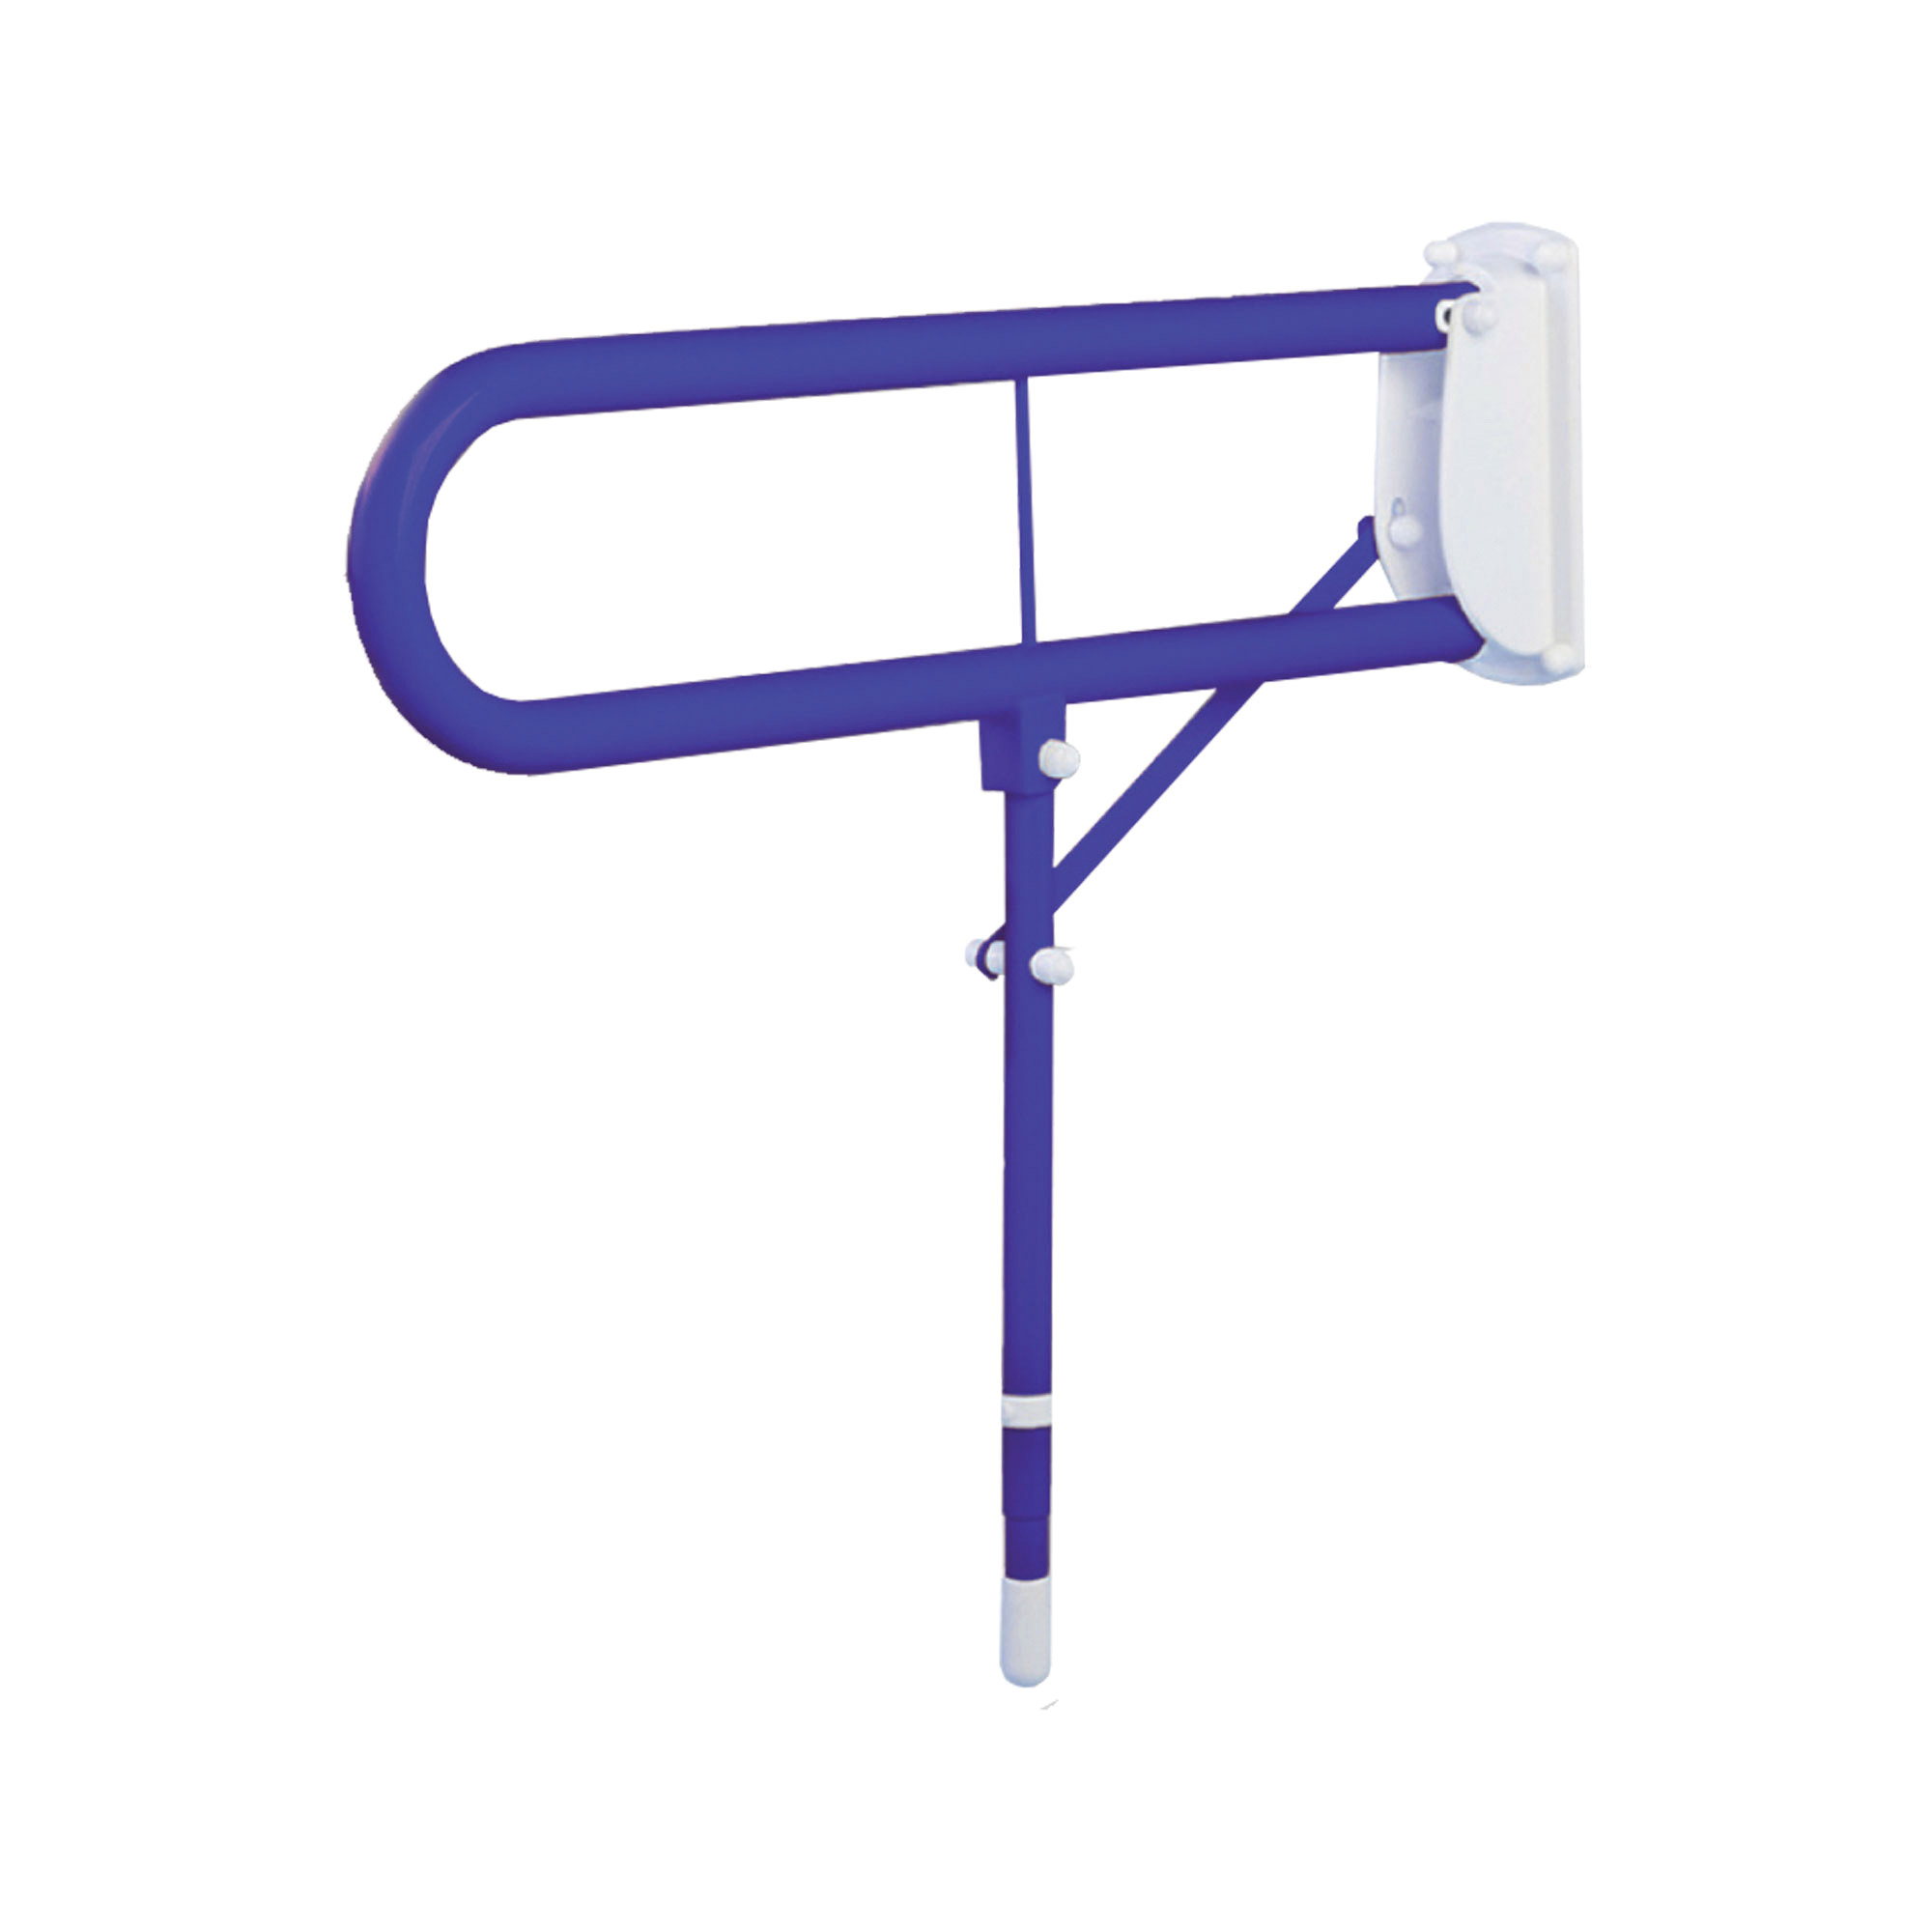 Blue Contract Hinged Arm Support - Height Adjustable